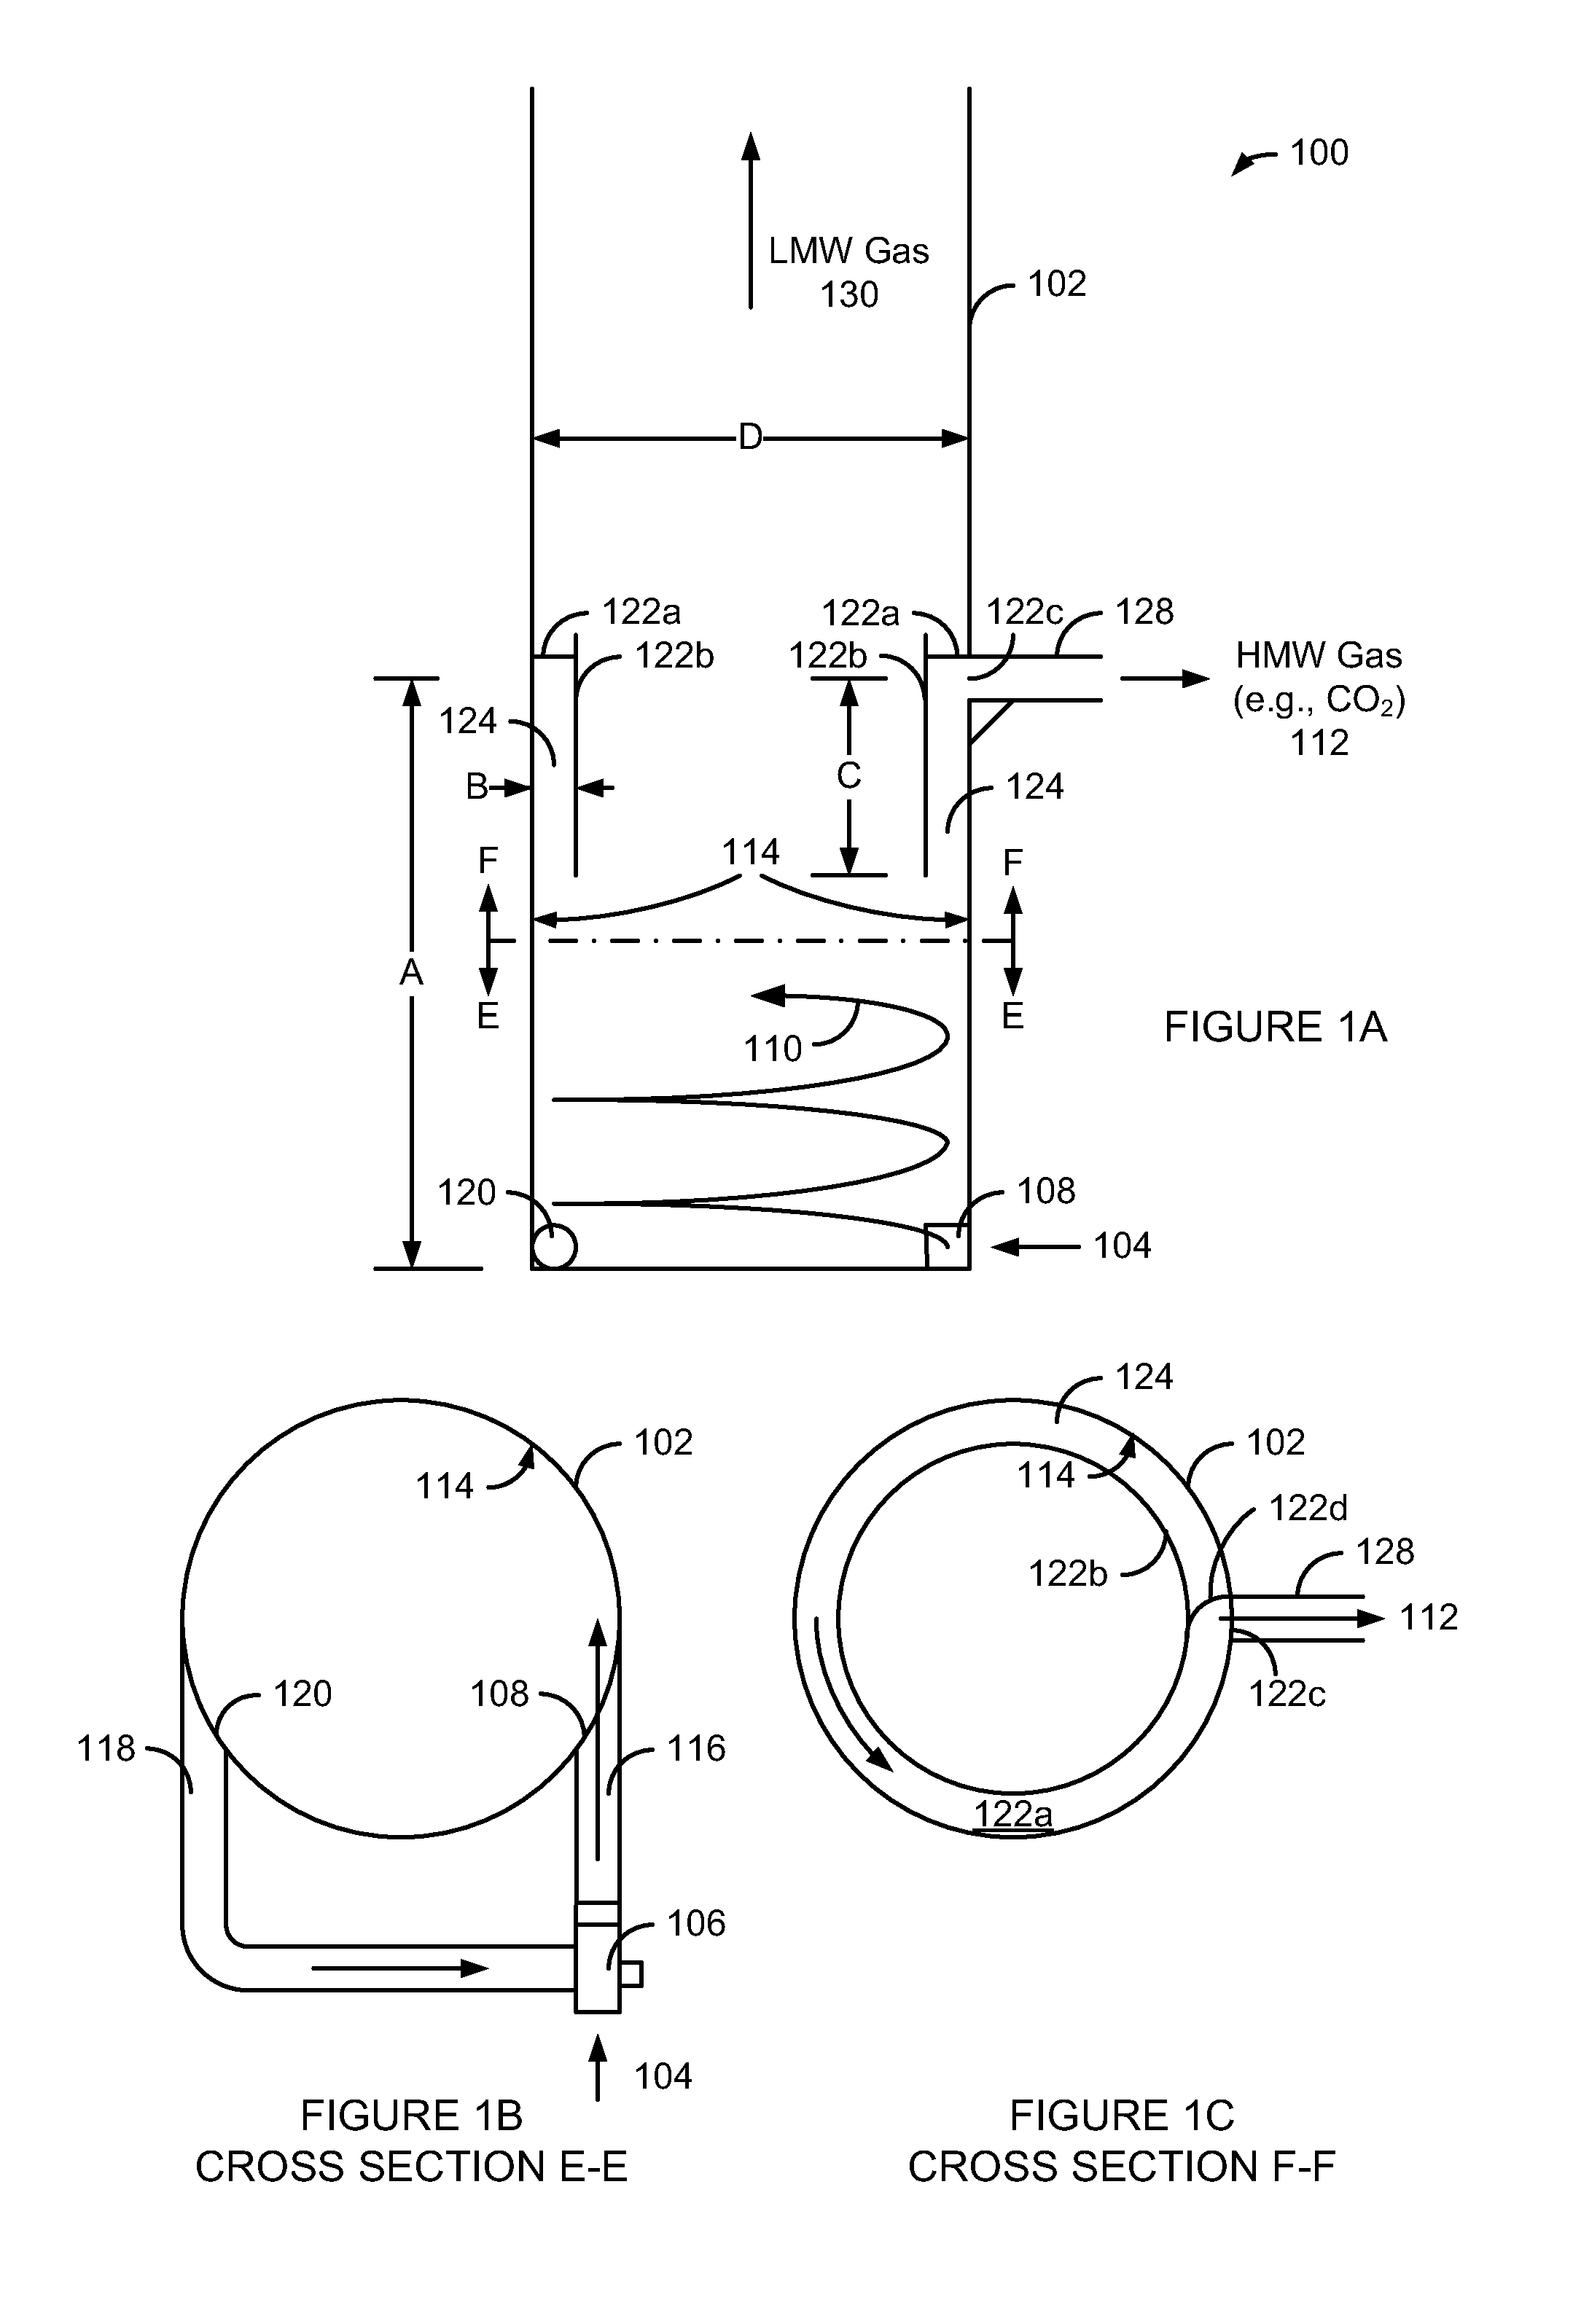 Method for separating high molecular weight gases from a combustion source